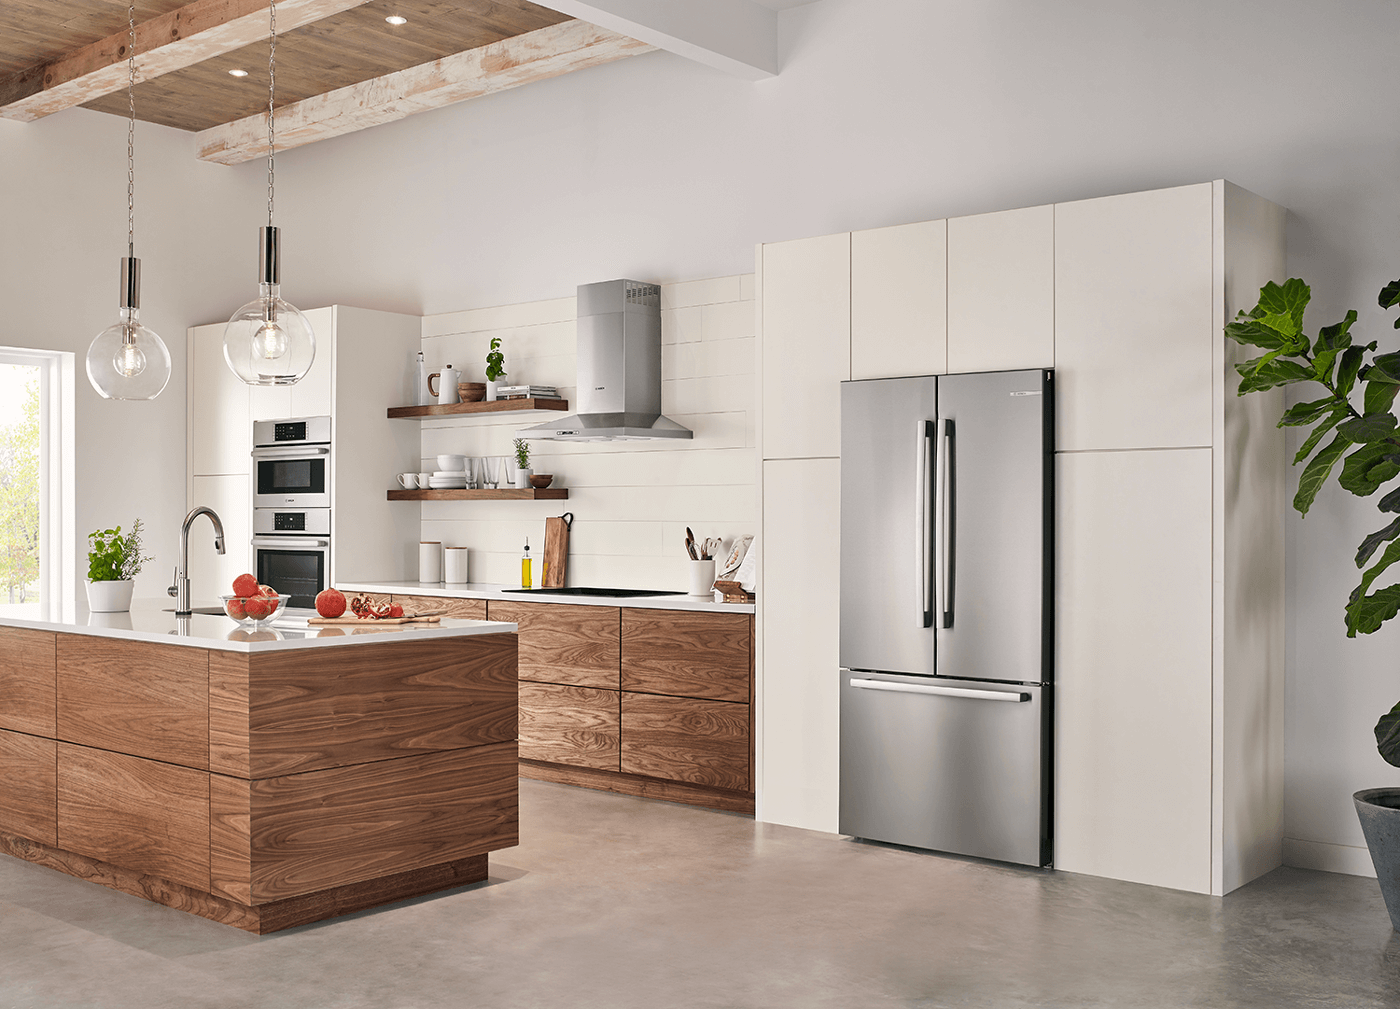 https://www.residentialproductsonline.com/sites/rpo/files/field/image/Bosch-Appliances-French-Door-Refrigerator-Wood-White-Cabinets.png